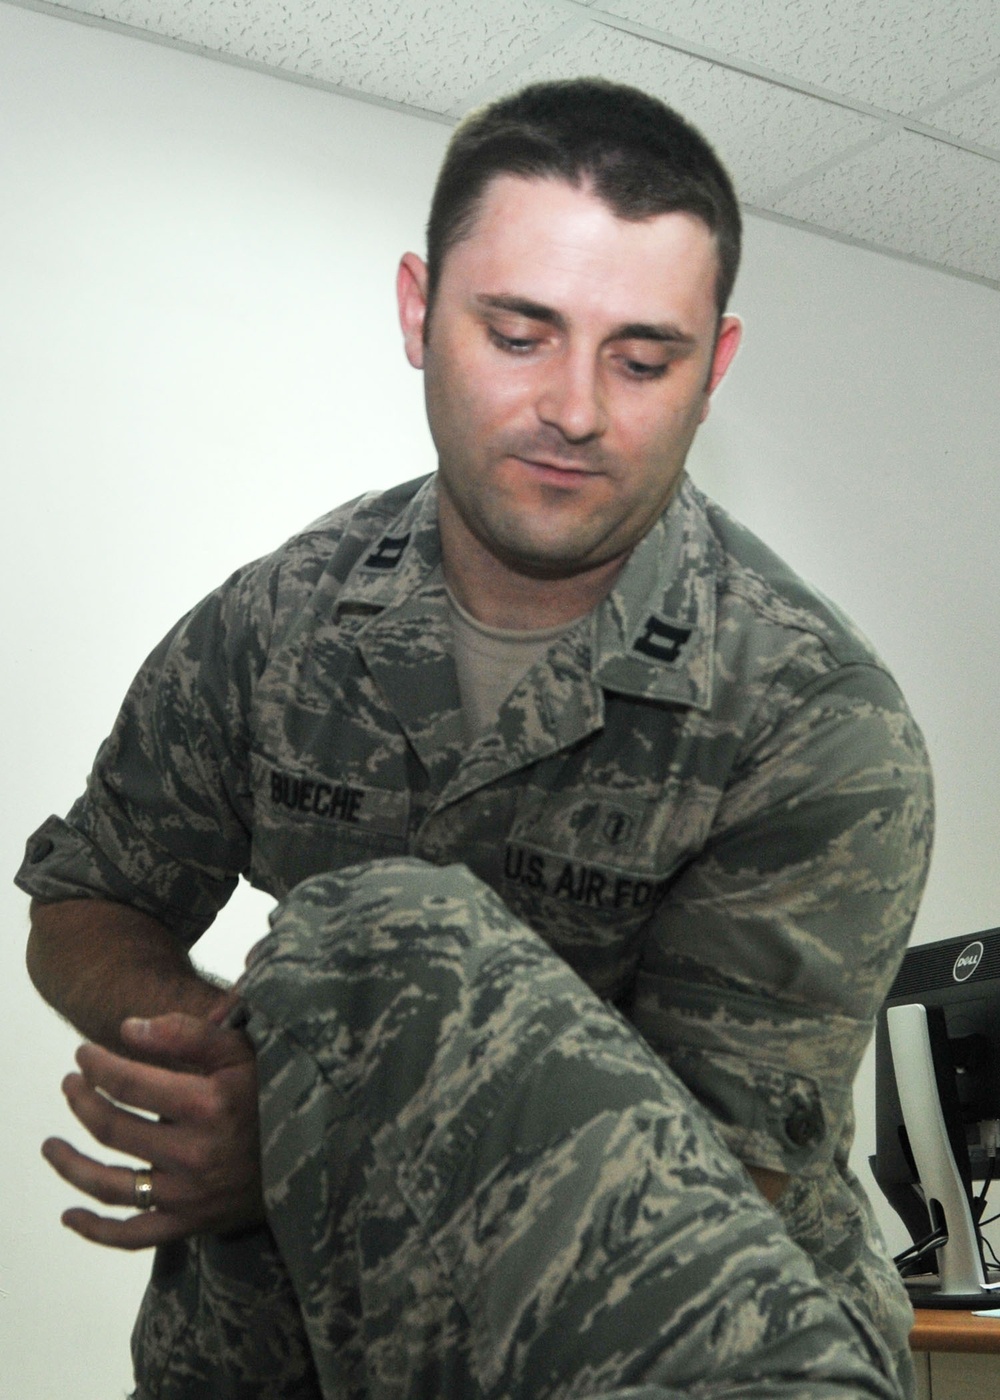 Physical therapy available at 380th AEW